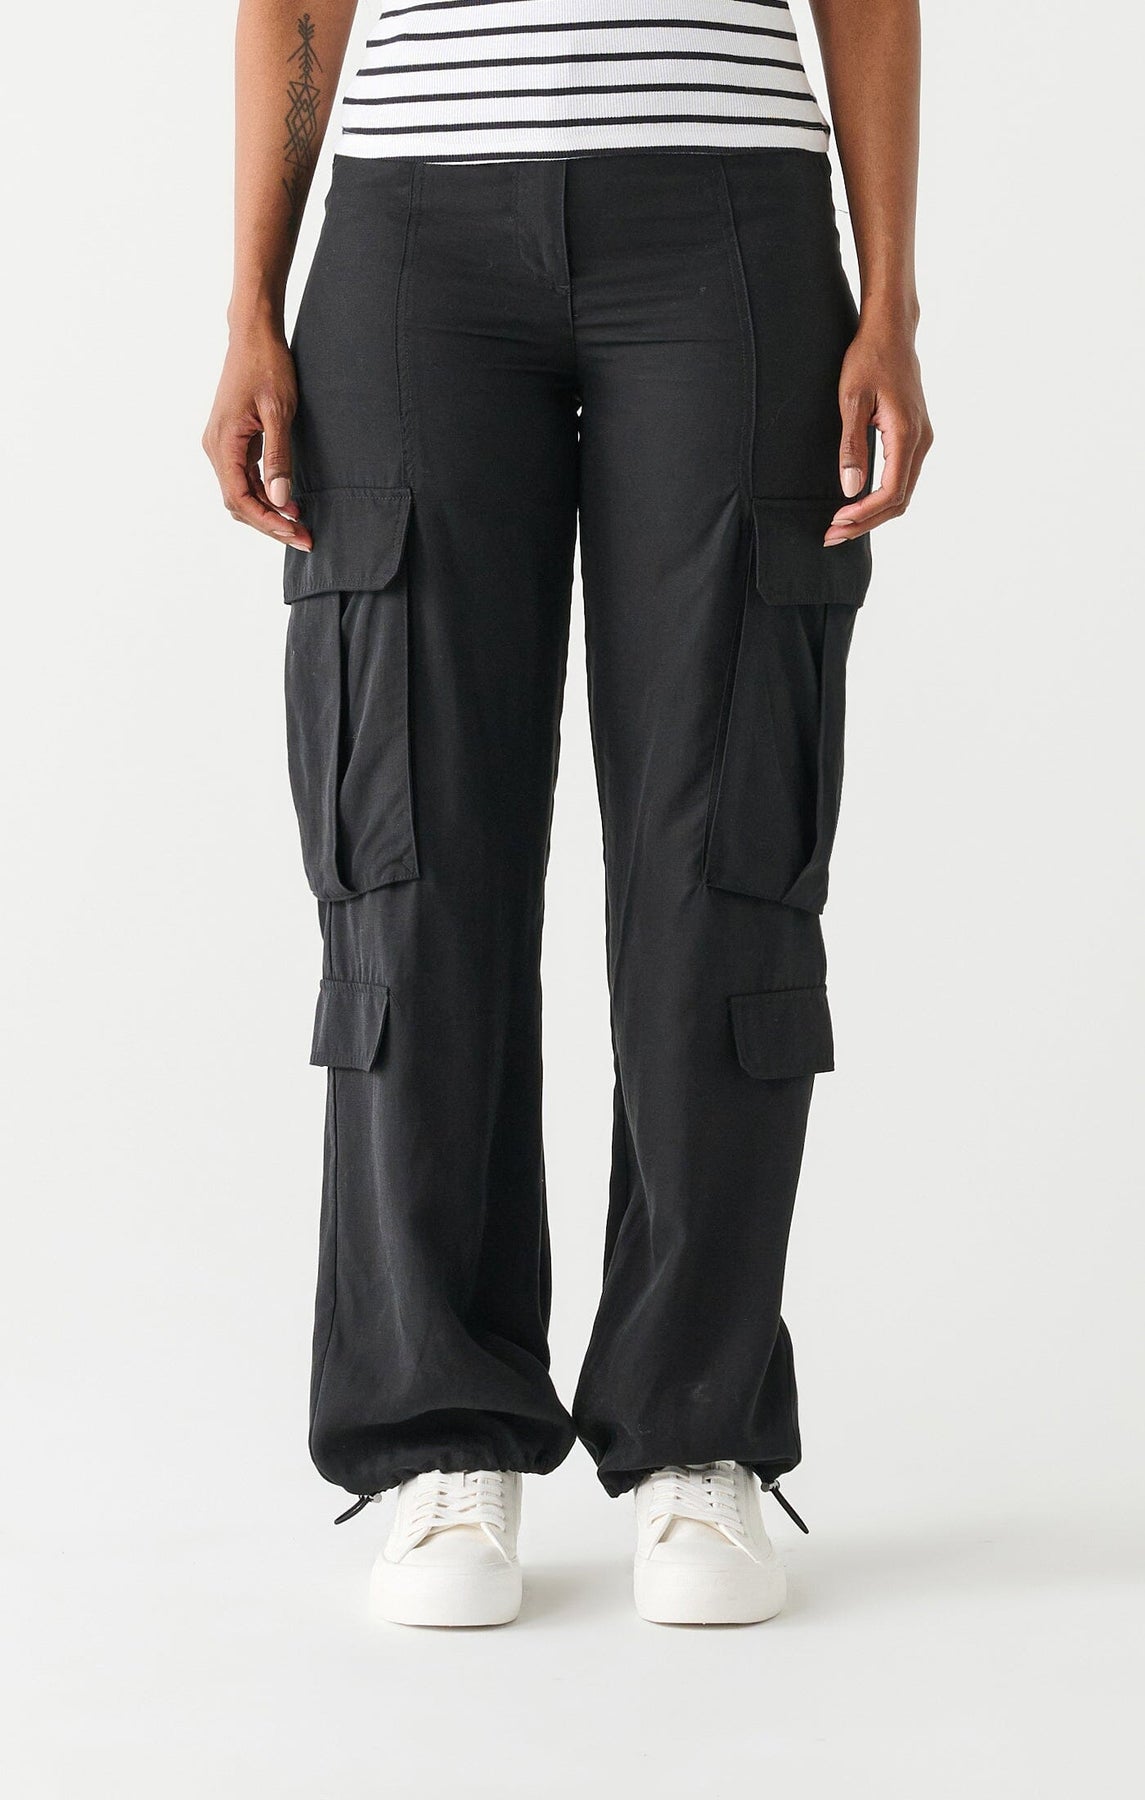 Looking This Good Cargo Pants (Black) - Bella V Boutique